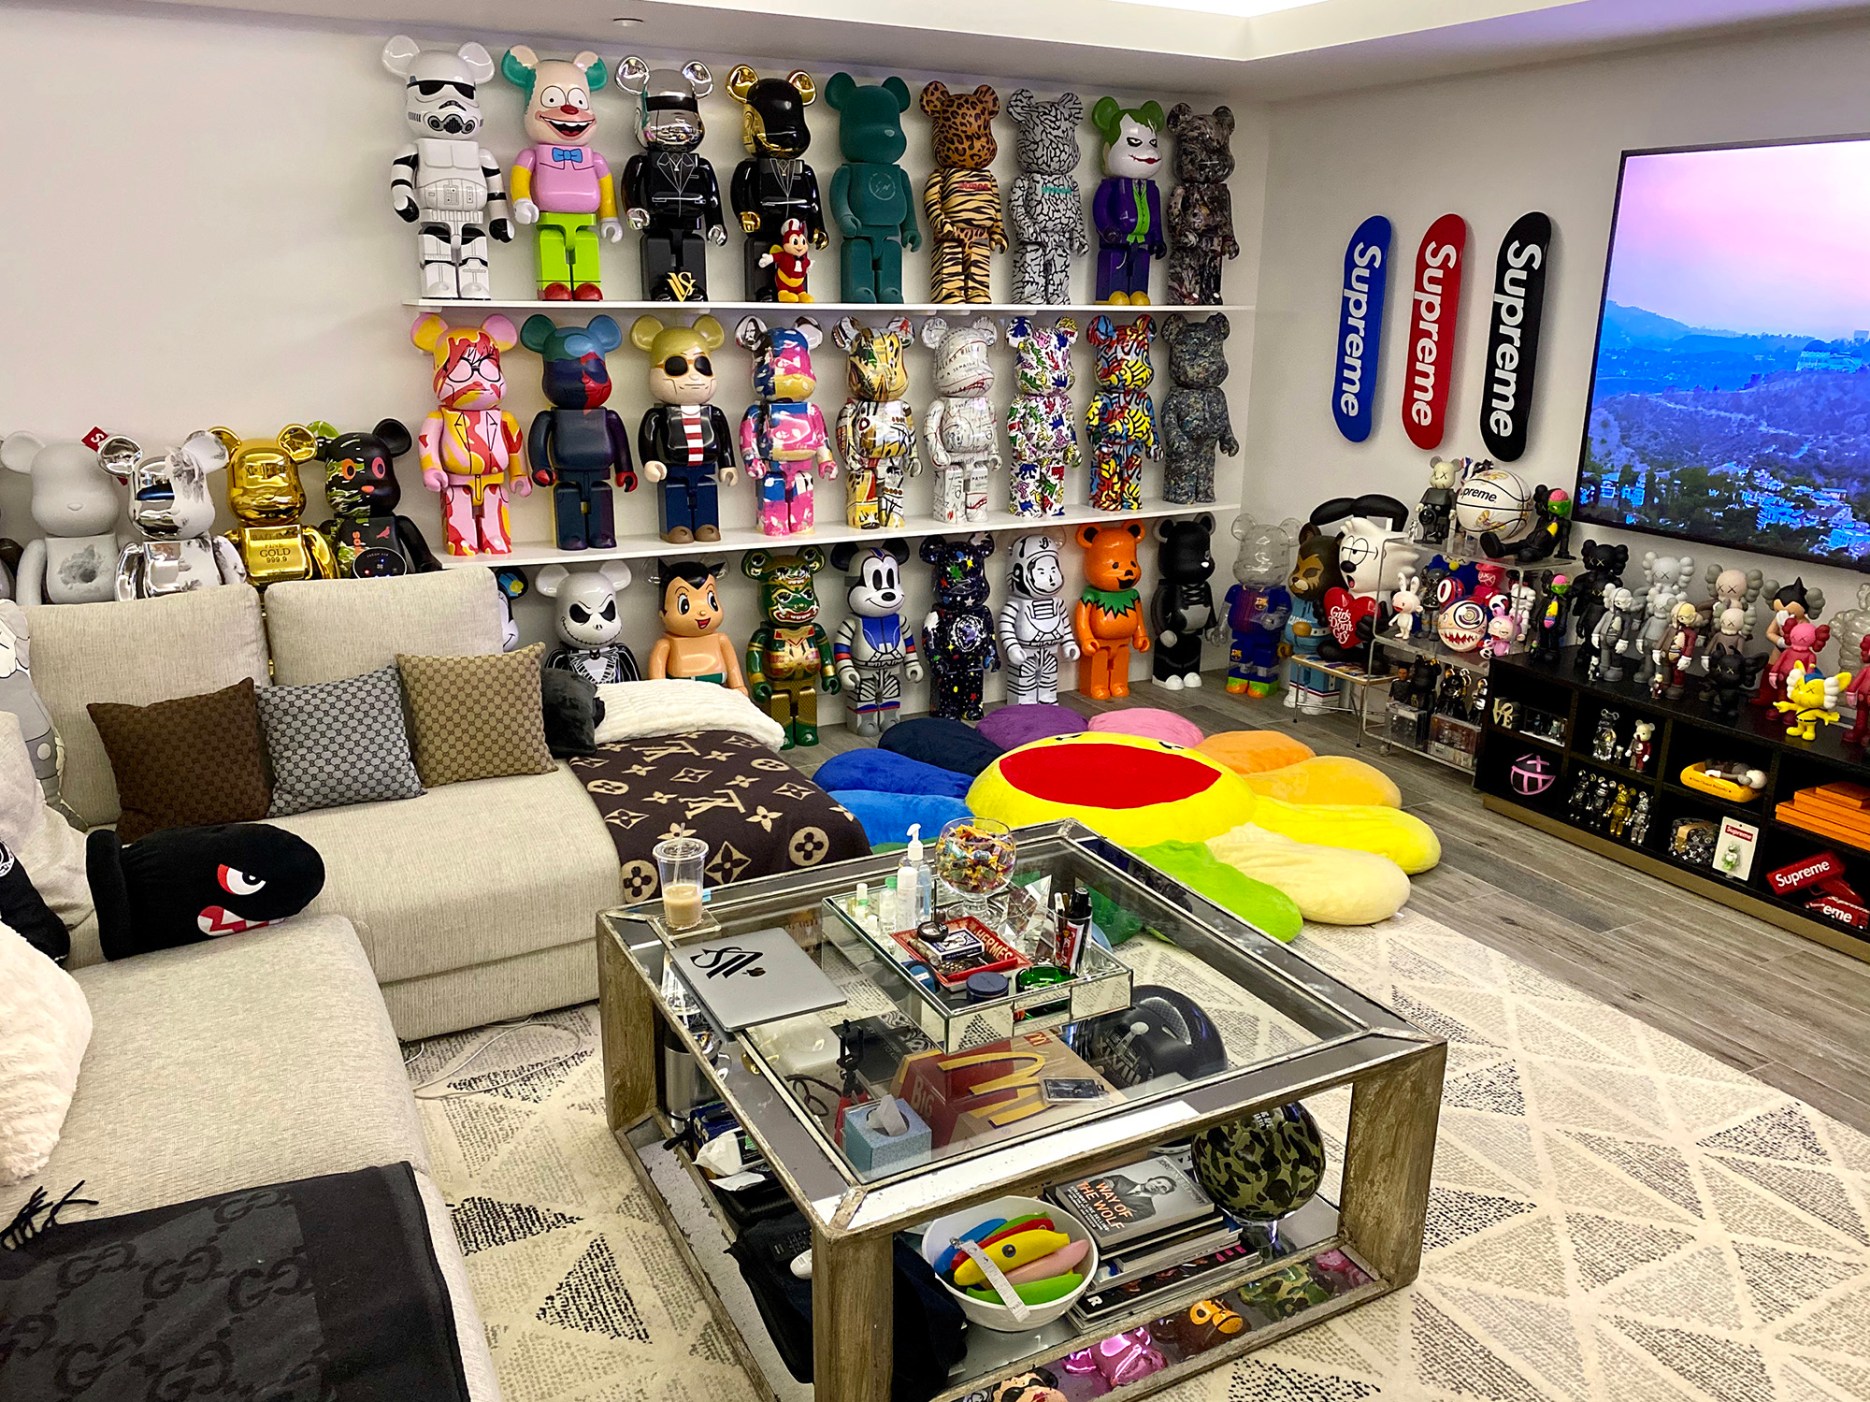 Lifestyle image of Ben Baller's art collection